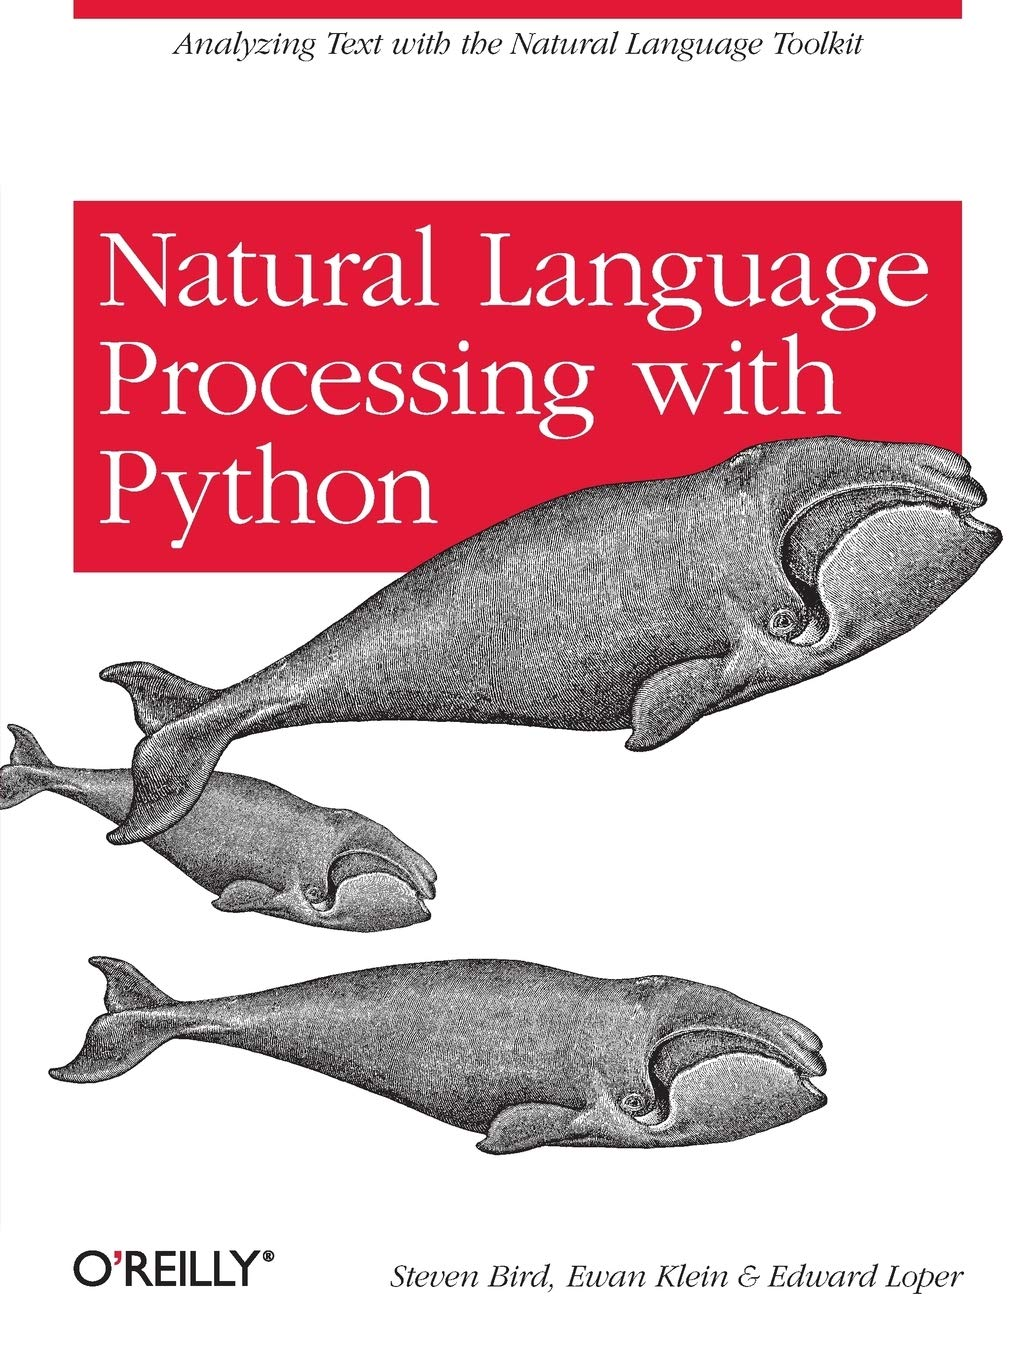 <a href=http://www.datascienceassn.org/sites/default/files/Natural%20Language%20Processing%20with%20Python.pdf target=_blank rel=noopener noreferrer nofollow>Bird, Klein, Loper. Natural Language Processing with Python</a> (free pdf)